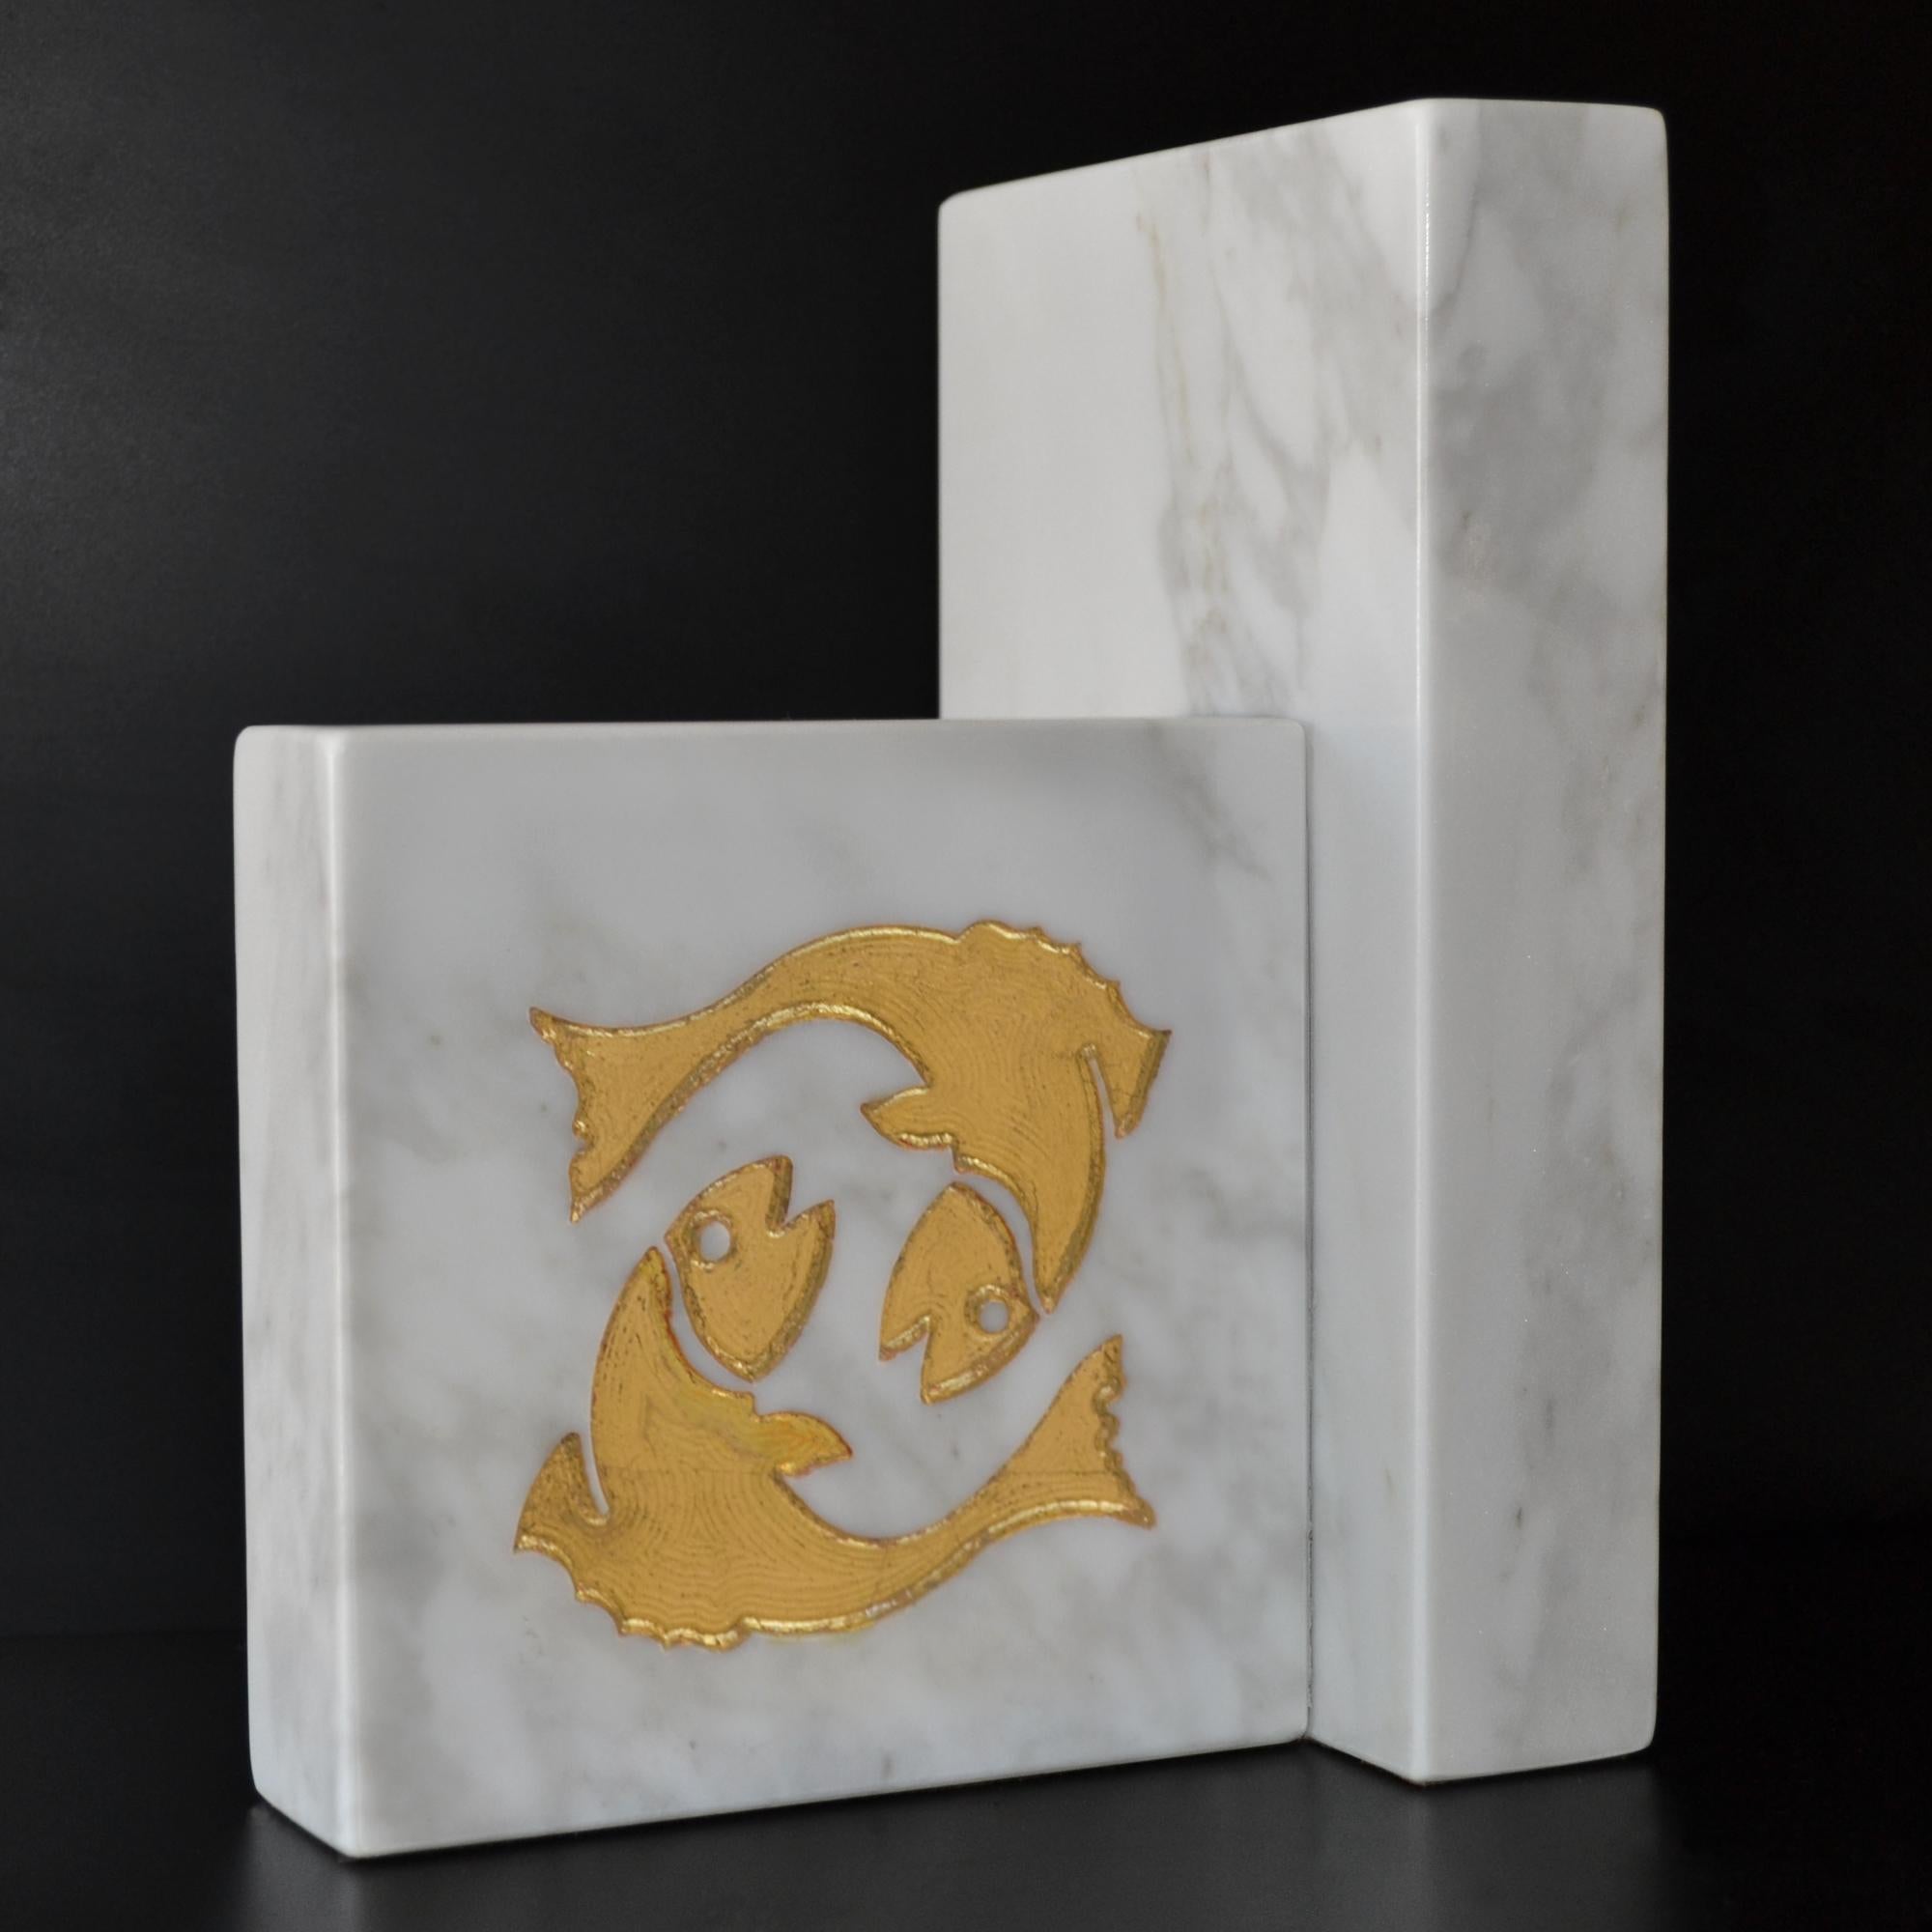 Contemporary Cupioli White Marble Bookends  gold leaf  Inlaid Zodiac  Handmade in Italy   For Sale